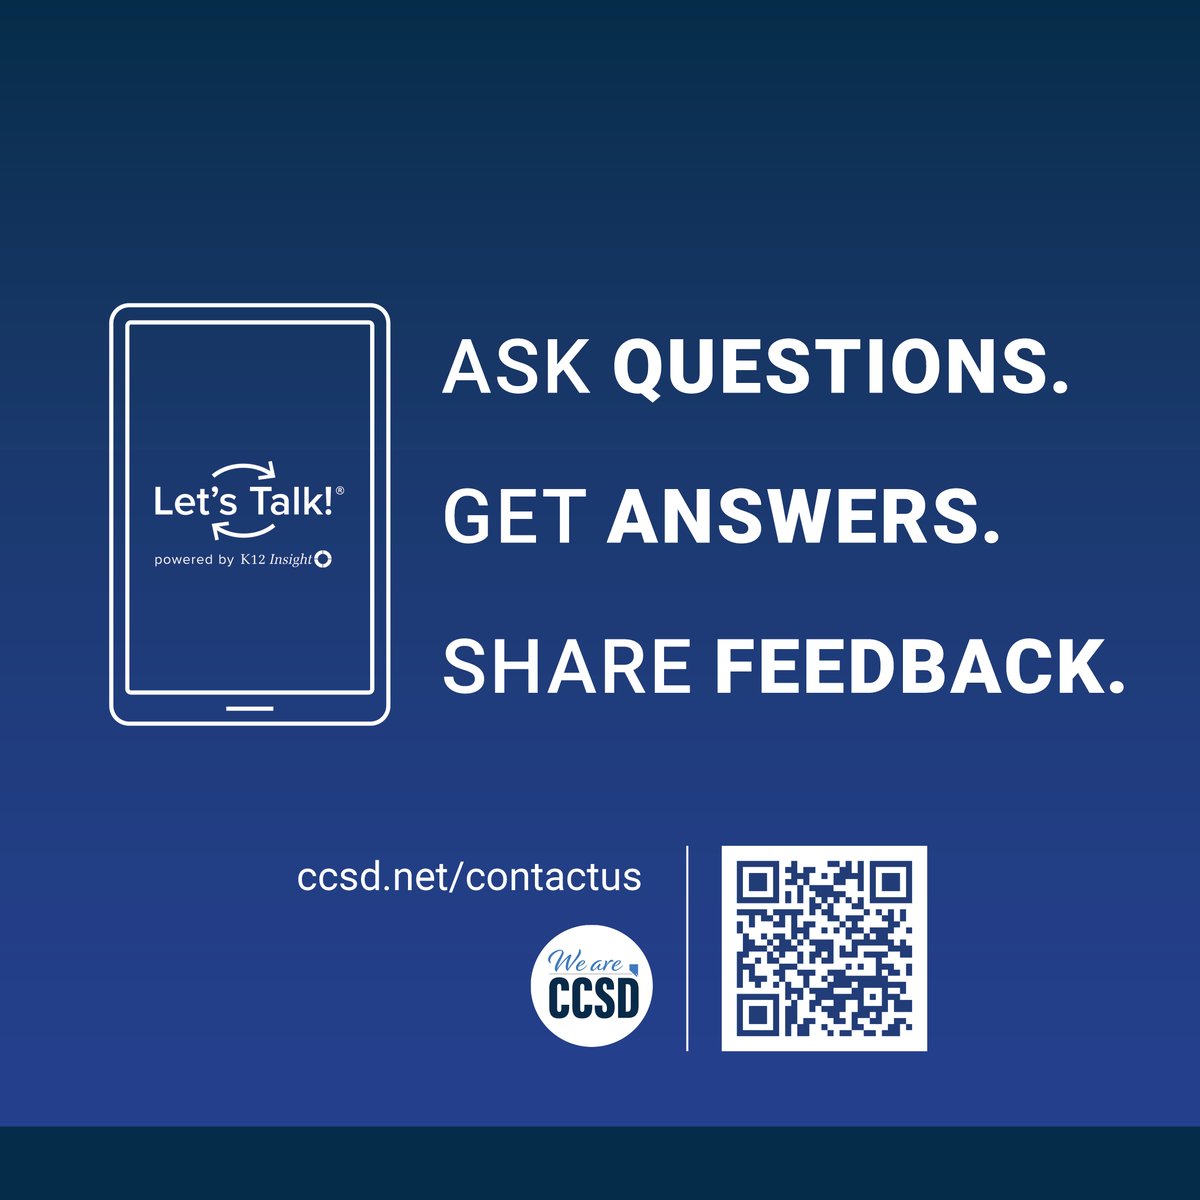 Do you have questions about job opportunities? Or do you think a colleague needs to be recognized for their hard work? Let’s Talk is an online service that allows our CCSD community to communicate with the school district: ccsd.net/contactus/